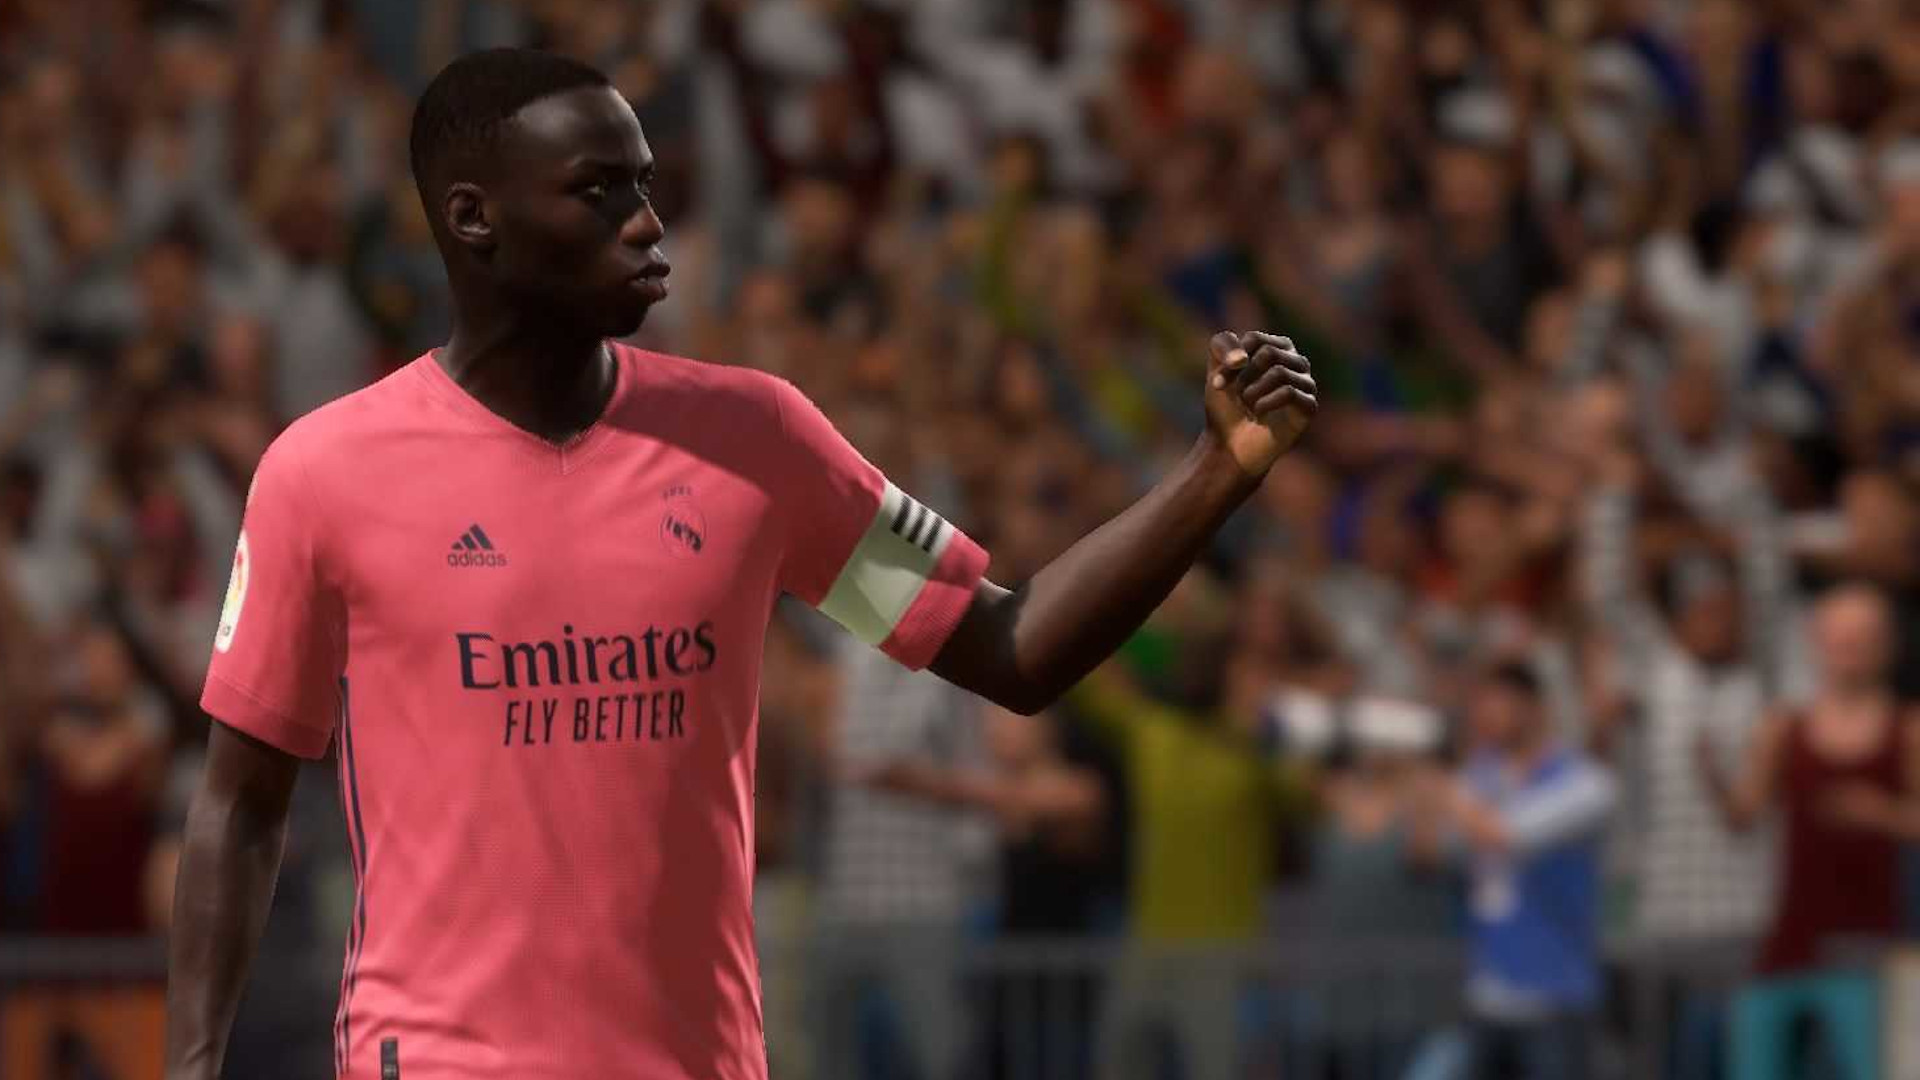 FIFA 22 best full backs: Mendy pumps his fist after scoring a goal for Real Madrid.